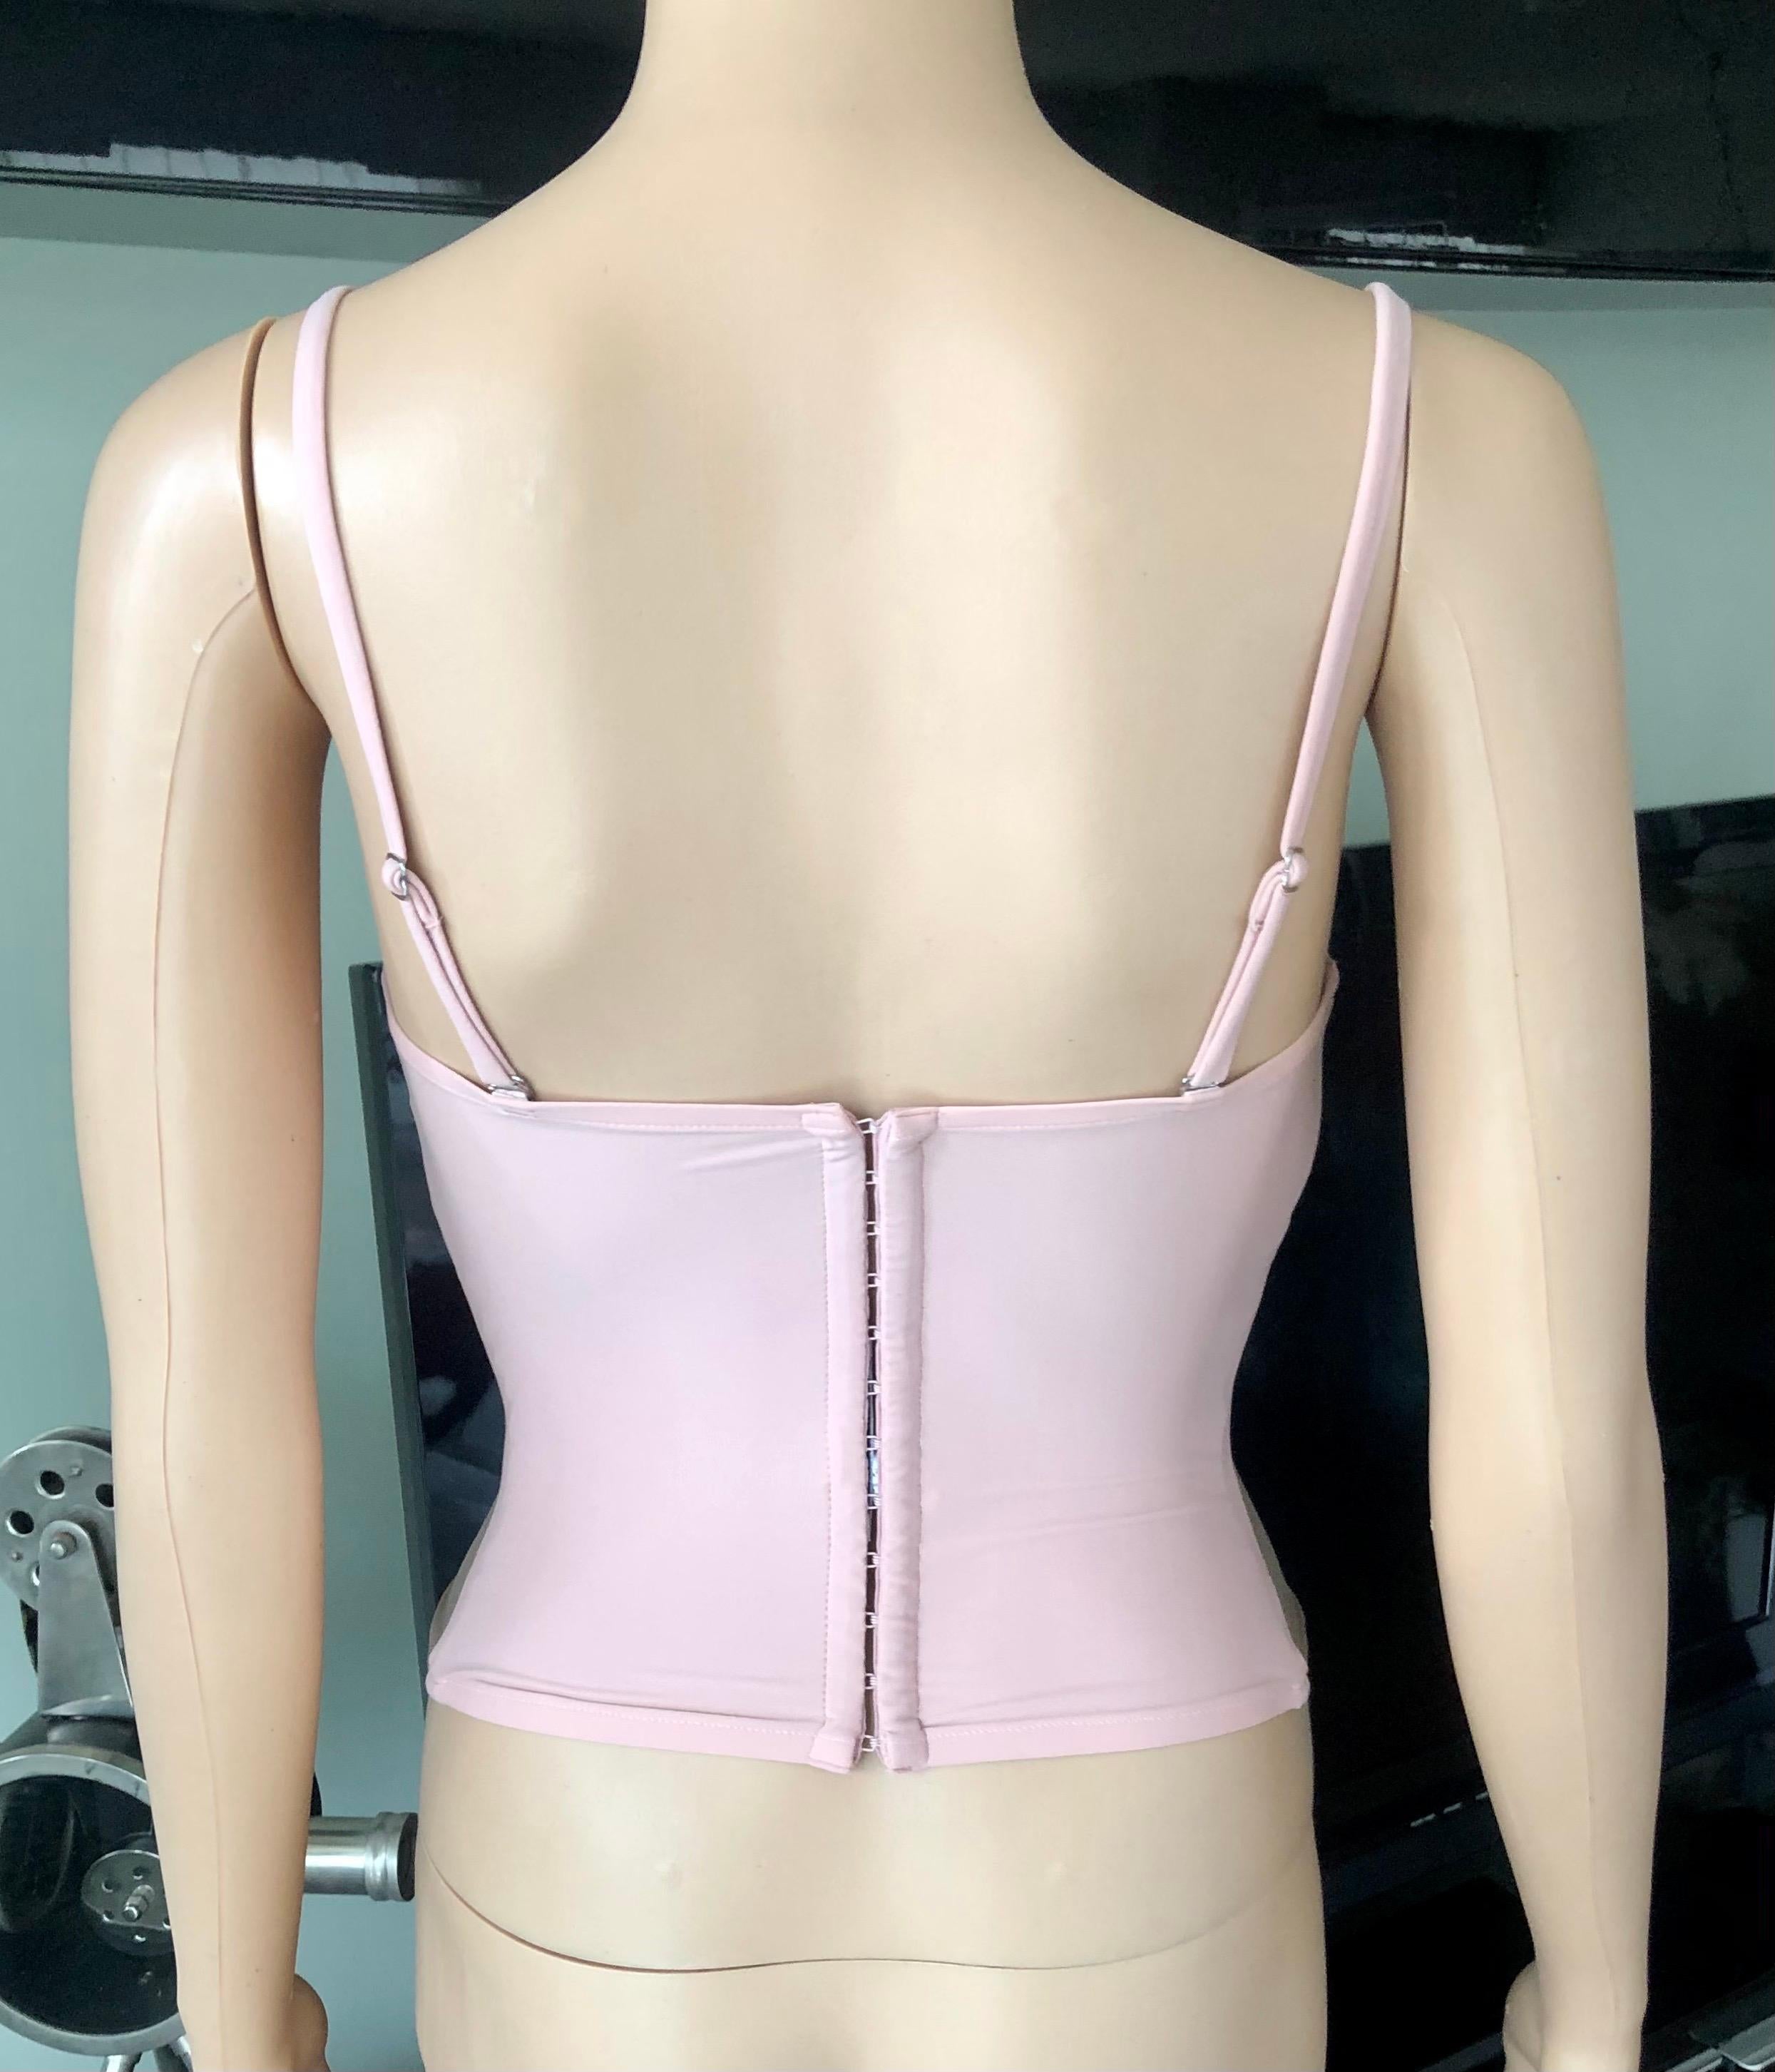 Christian Dior By John Galliano S/S 2006 Unworn Bustier Lace Corset Crop Top In Excellent Condition For Sale In Naples, FL